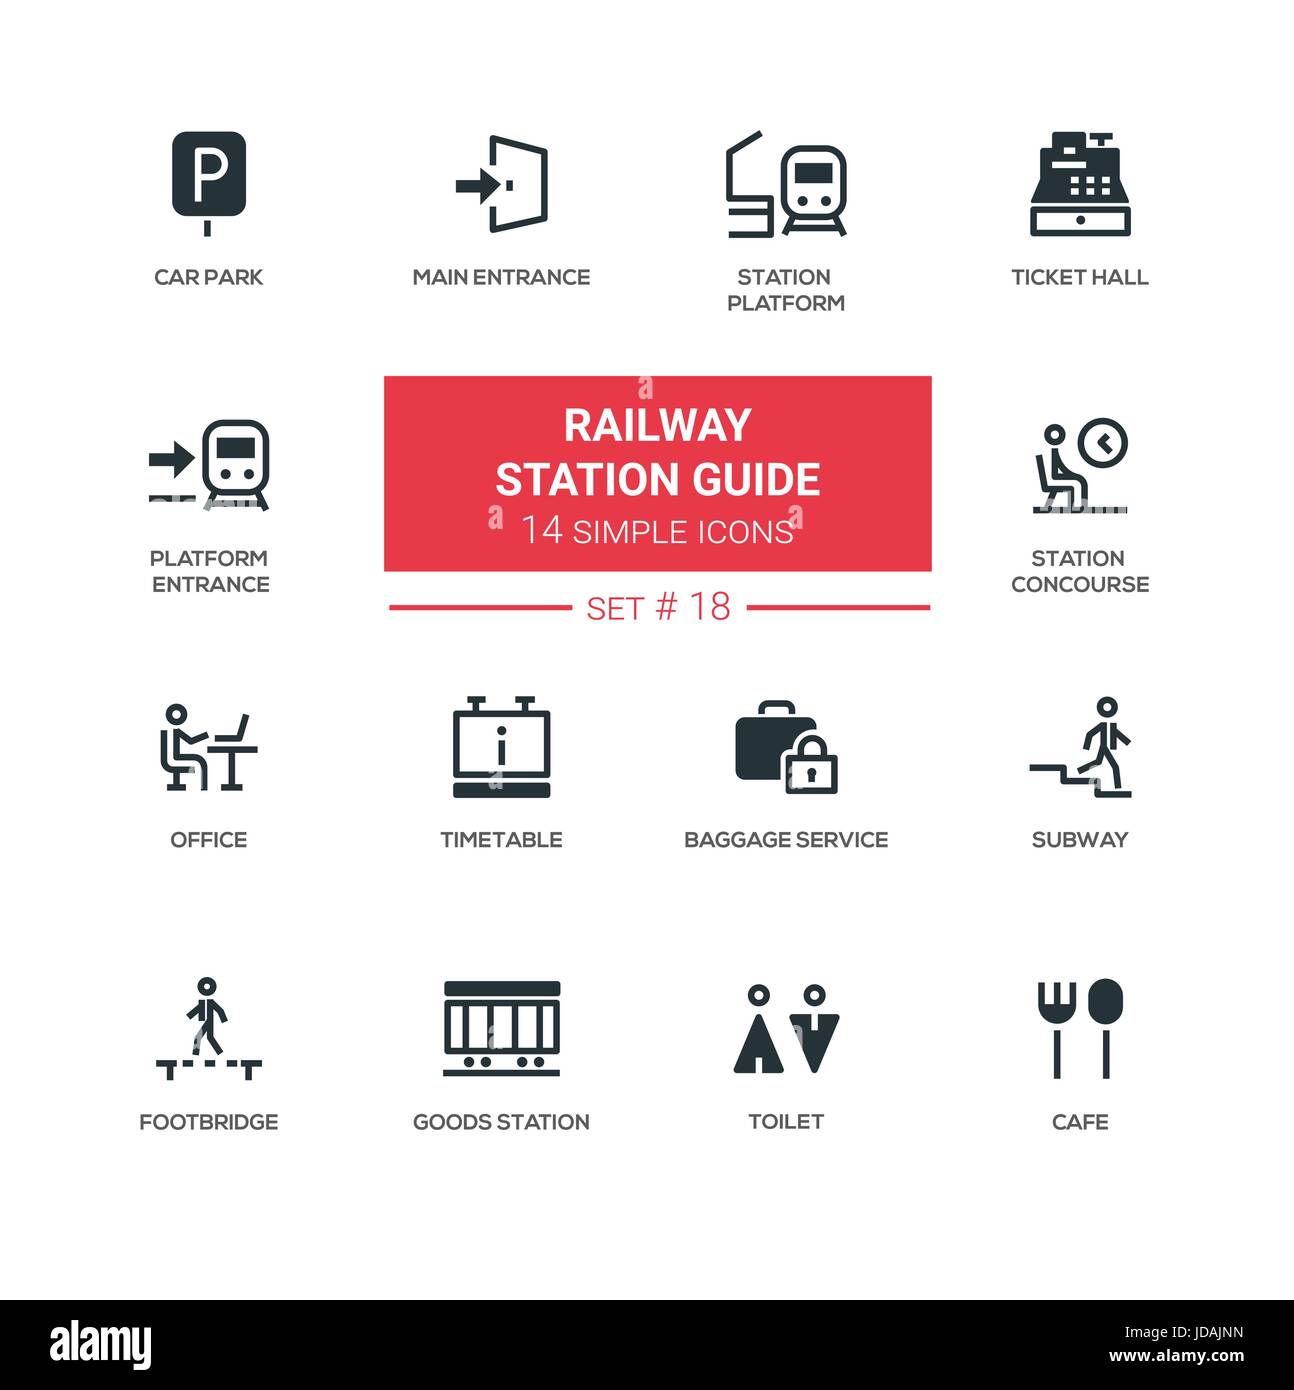 Railway station guide - modern simple icons, pictograms set Stock Vector